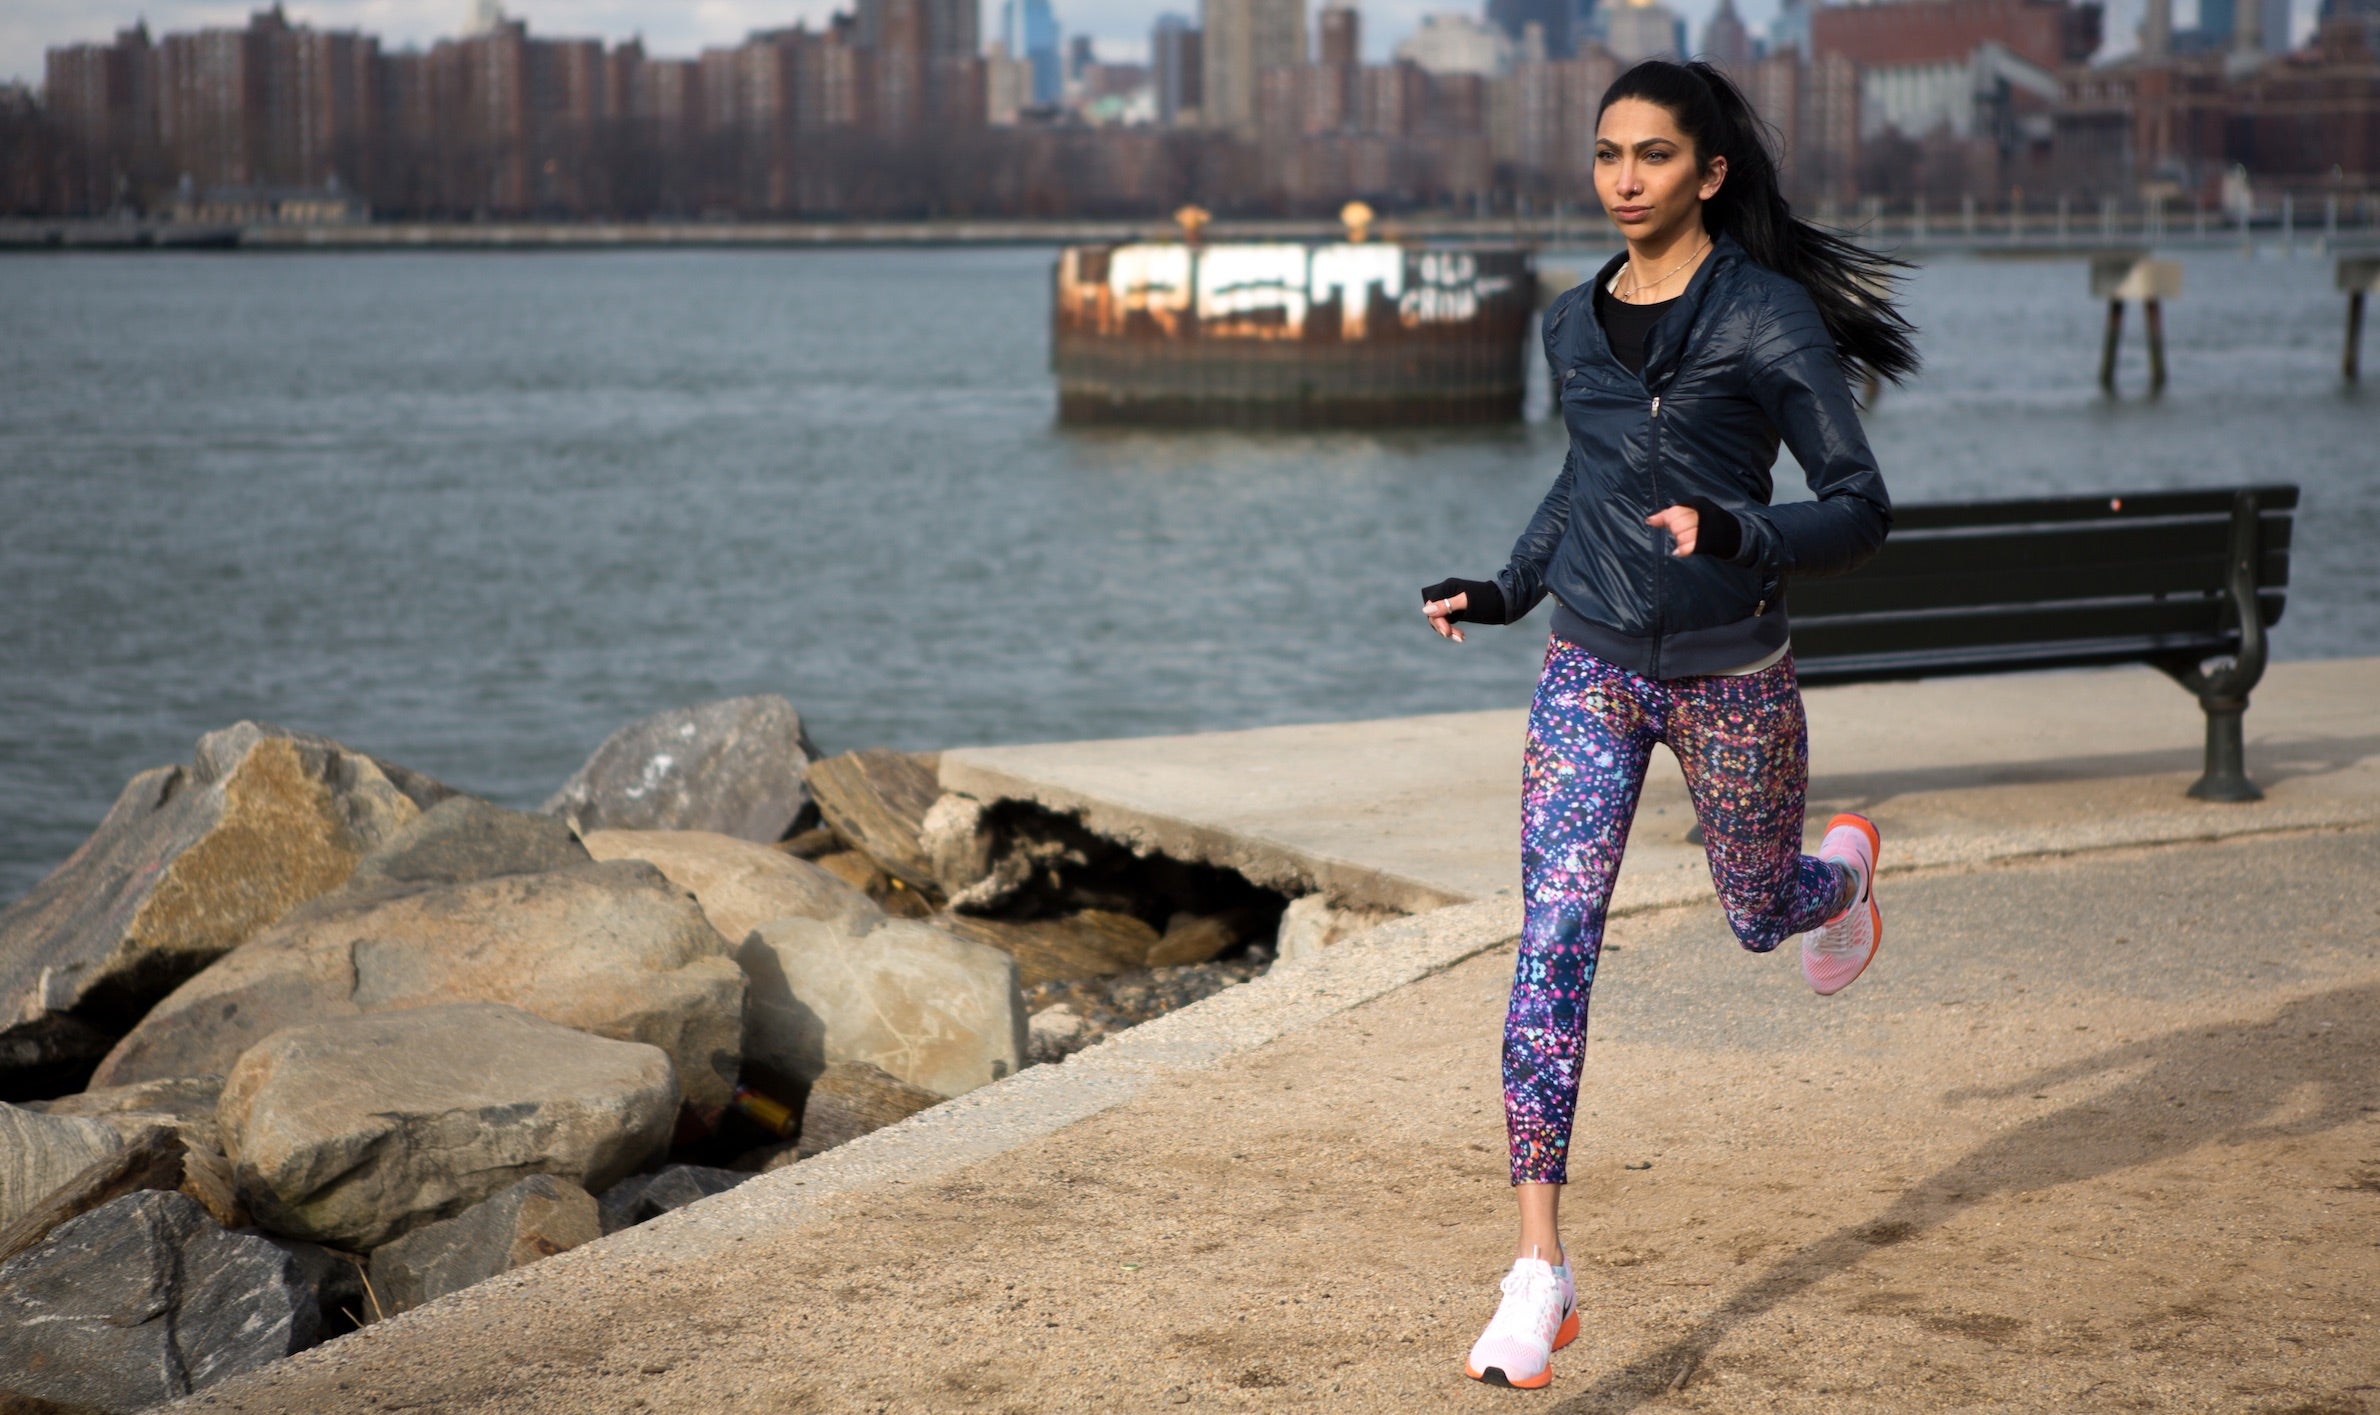 How to Choose Running Tights